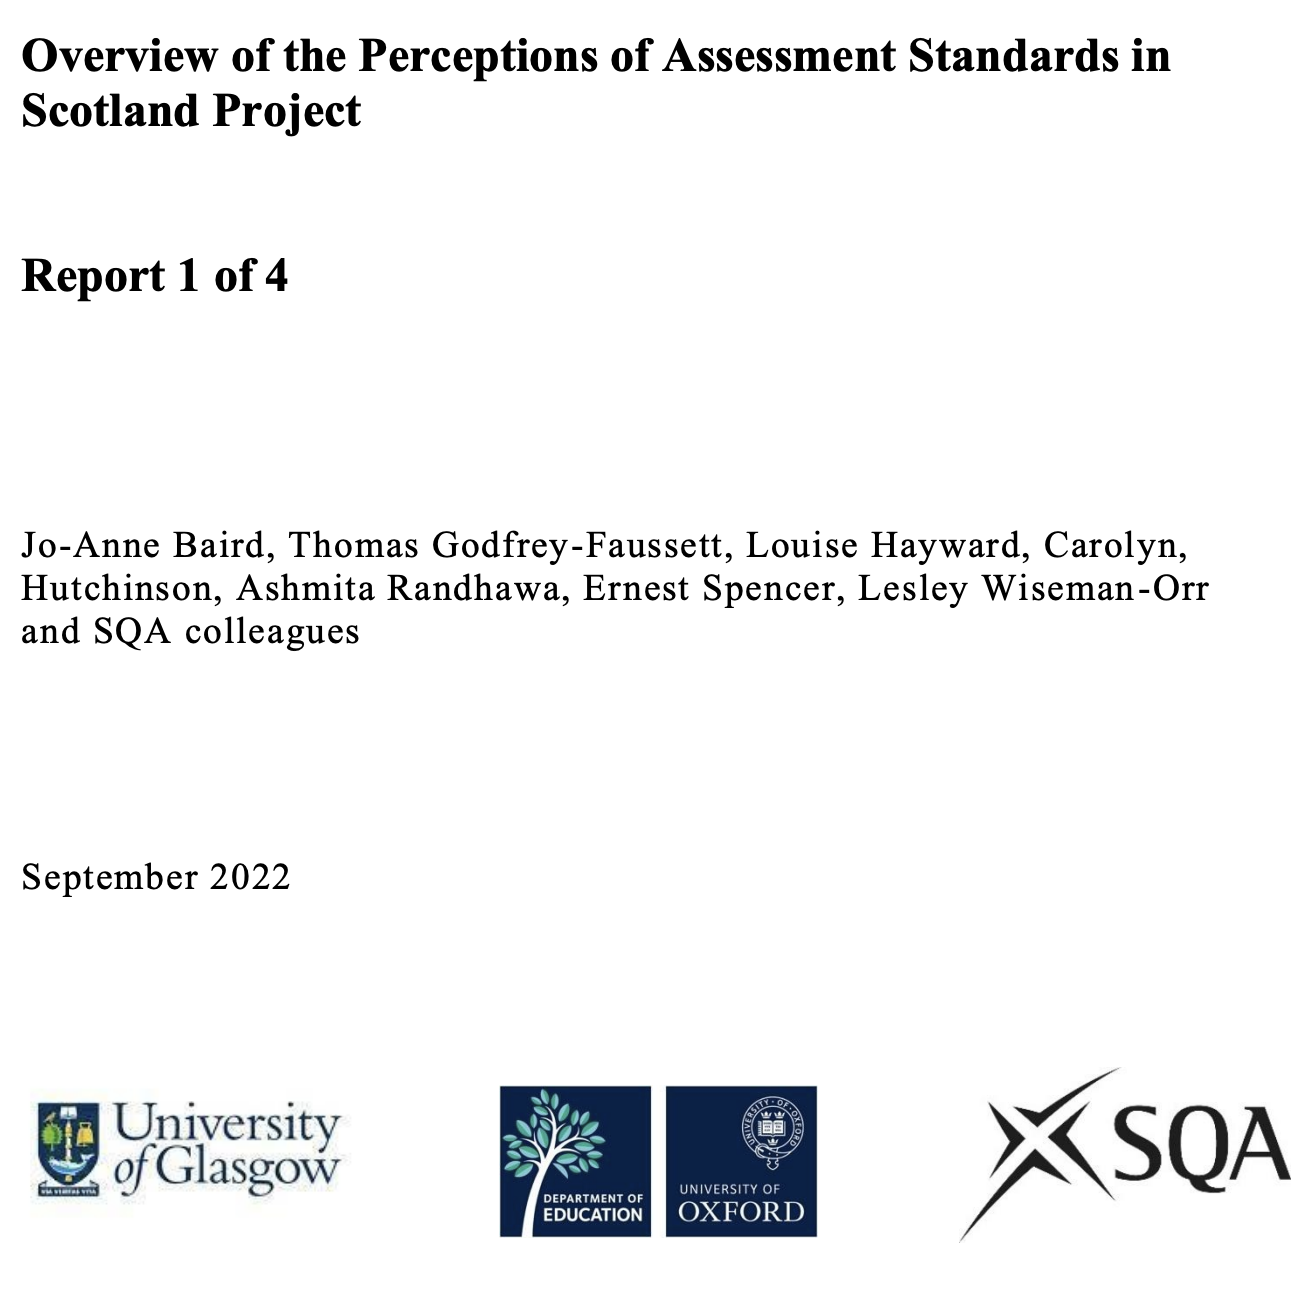 Overview of the Perceptions of Assessment Standards in Scotland Project Report 1 of 4. Jo